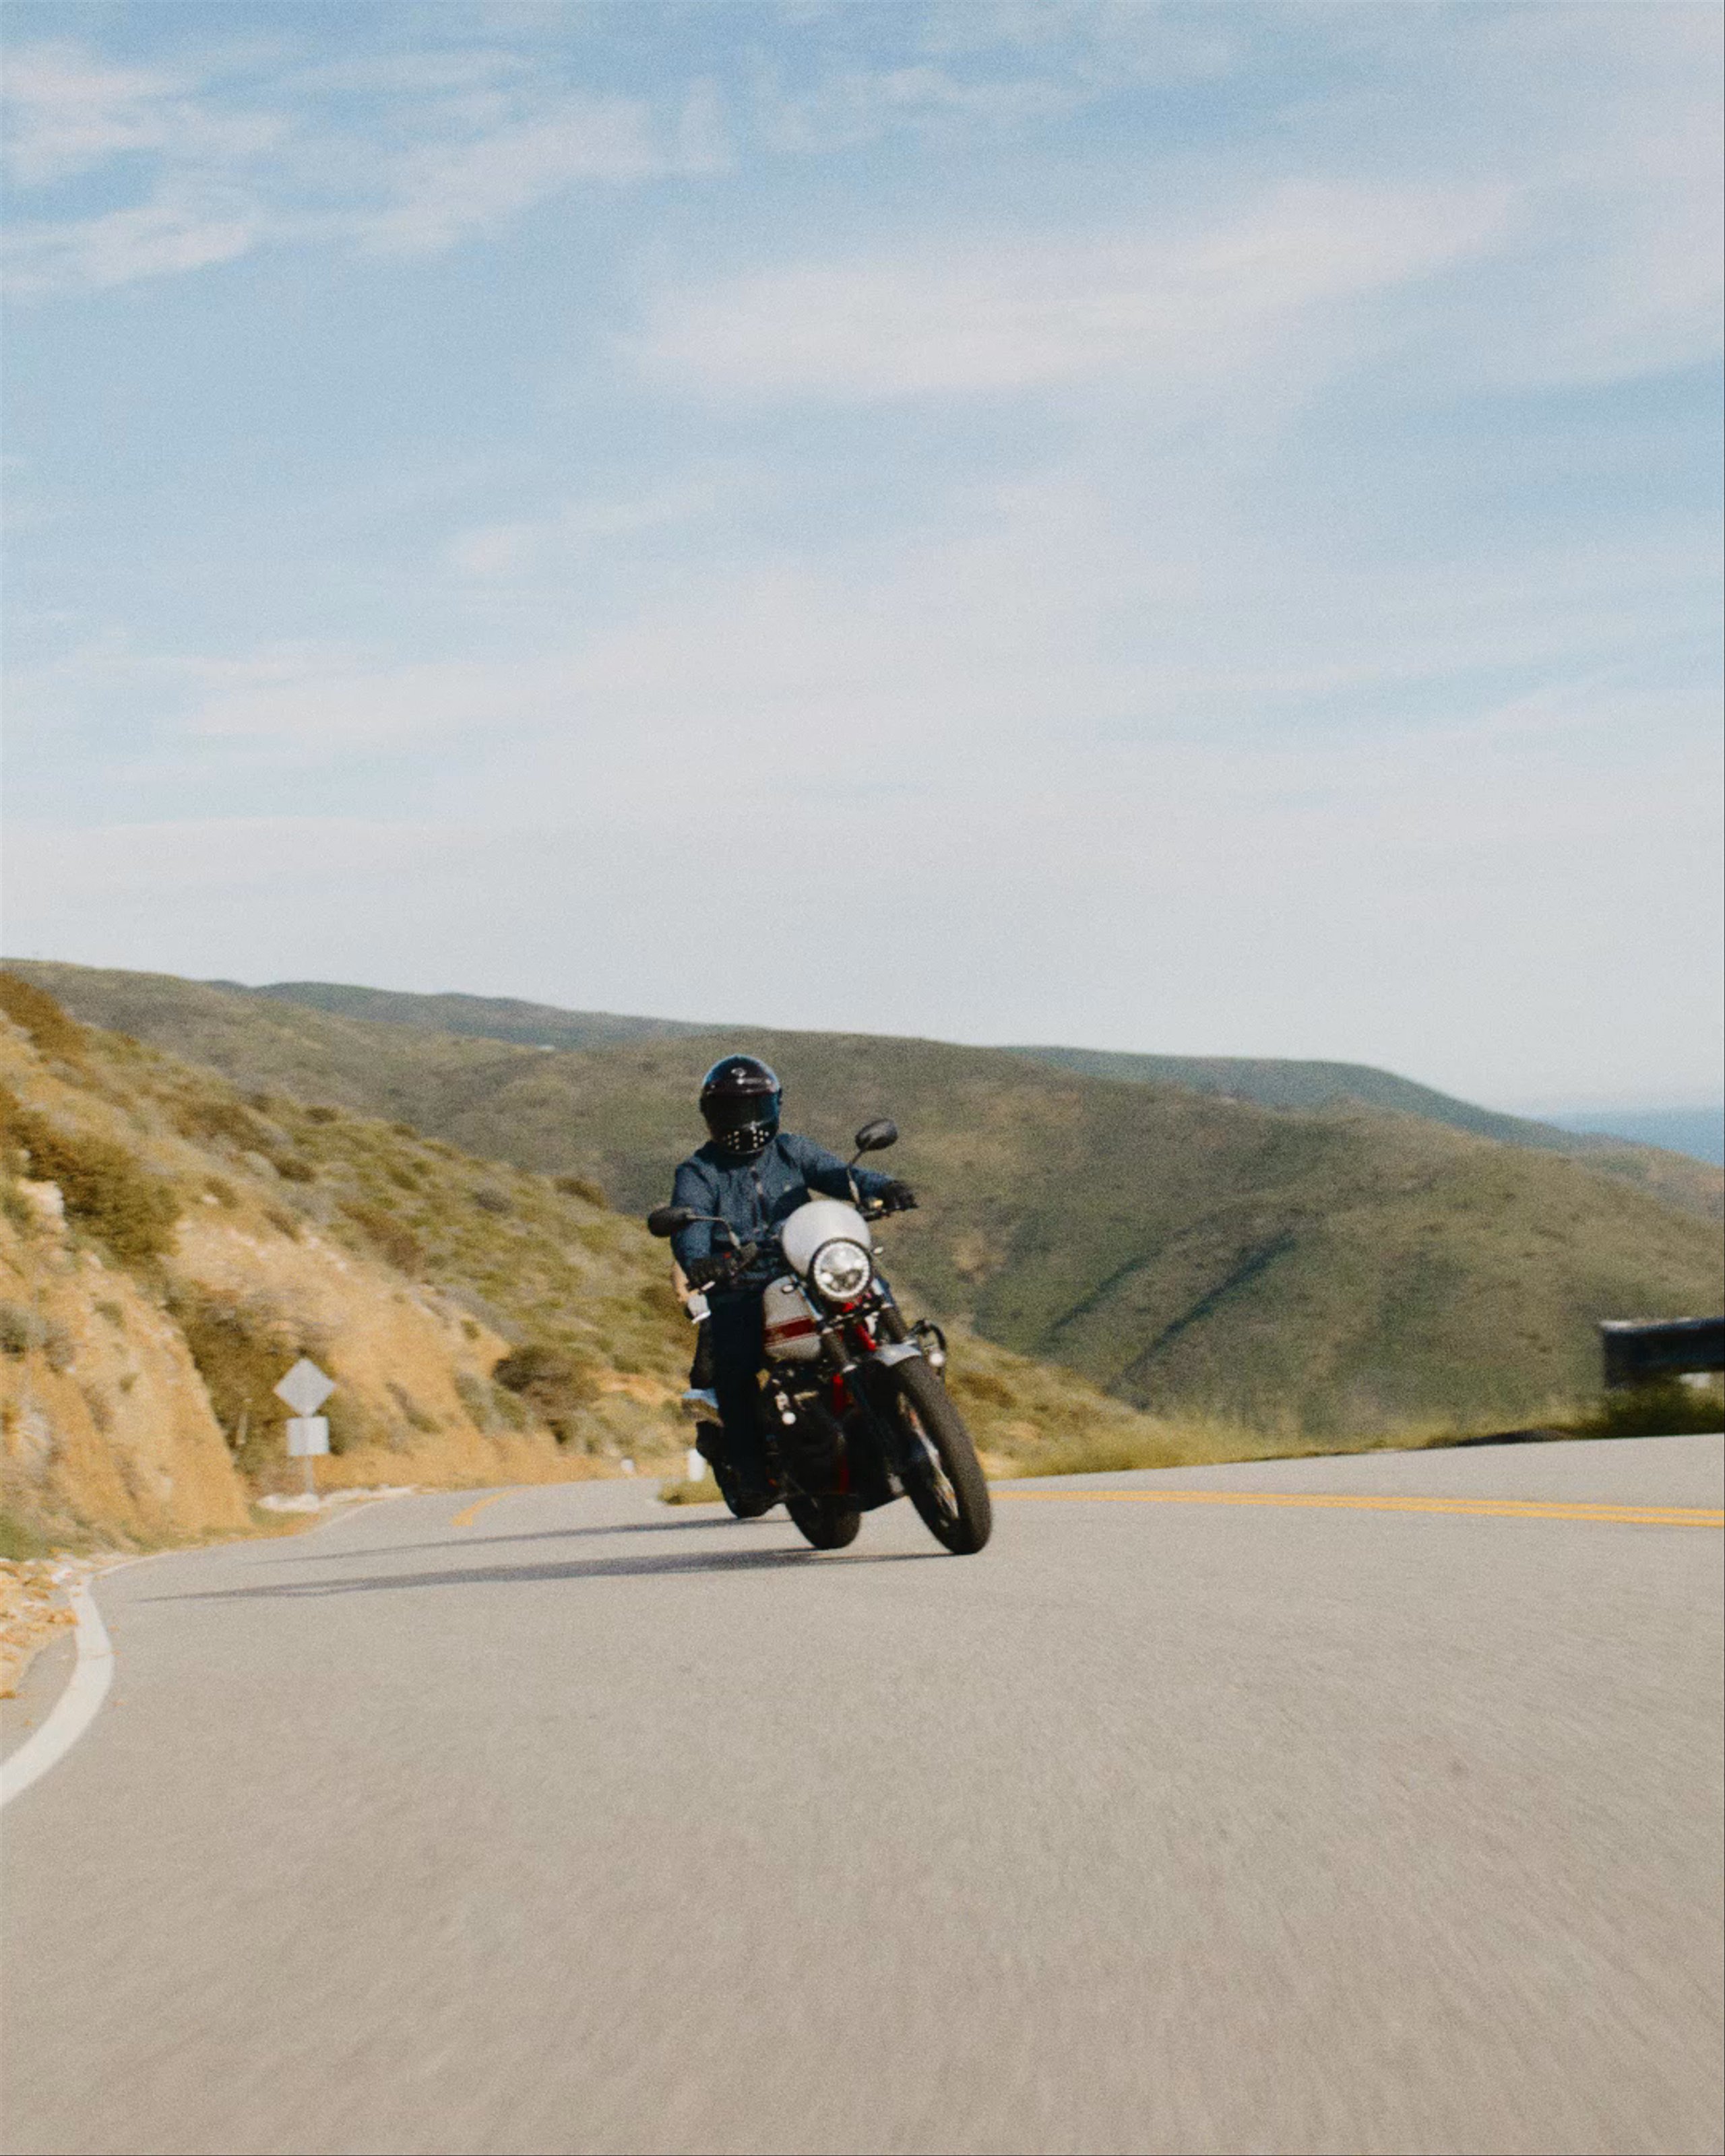 Video of two motorcyclists riding up Malibu hills with Pacific Ocean in the background